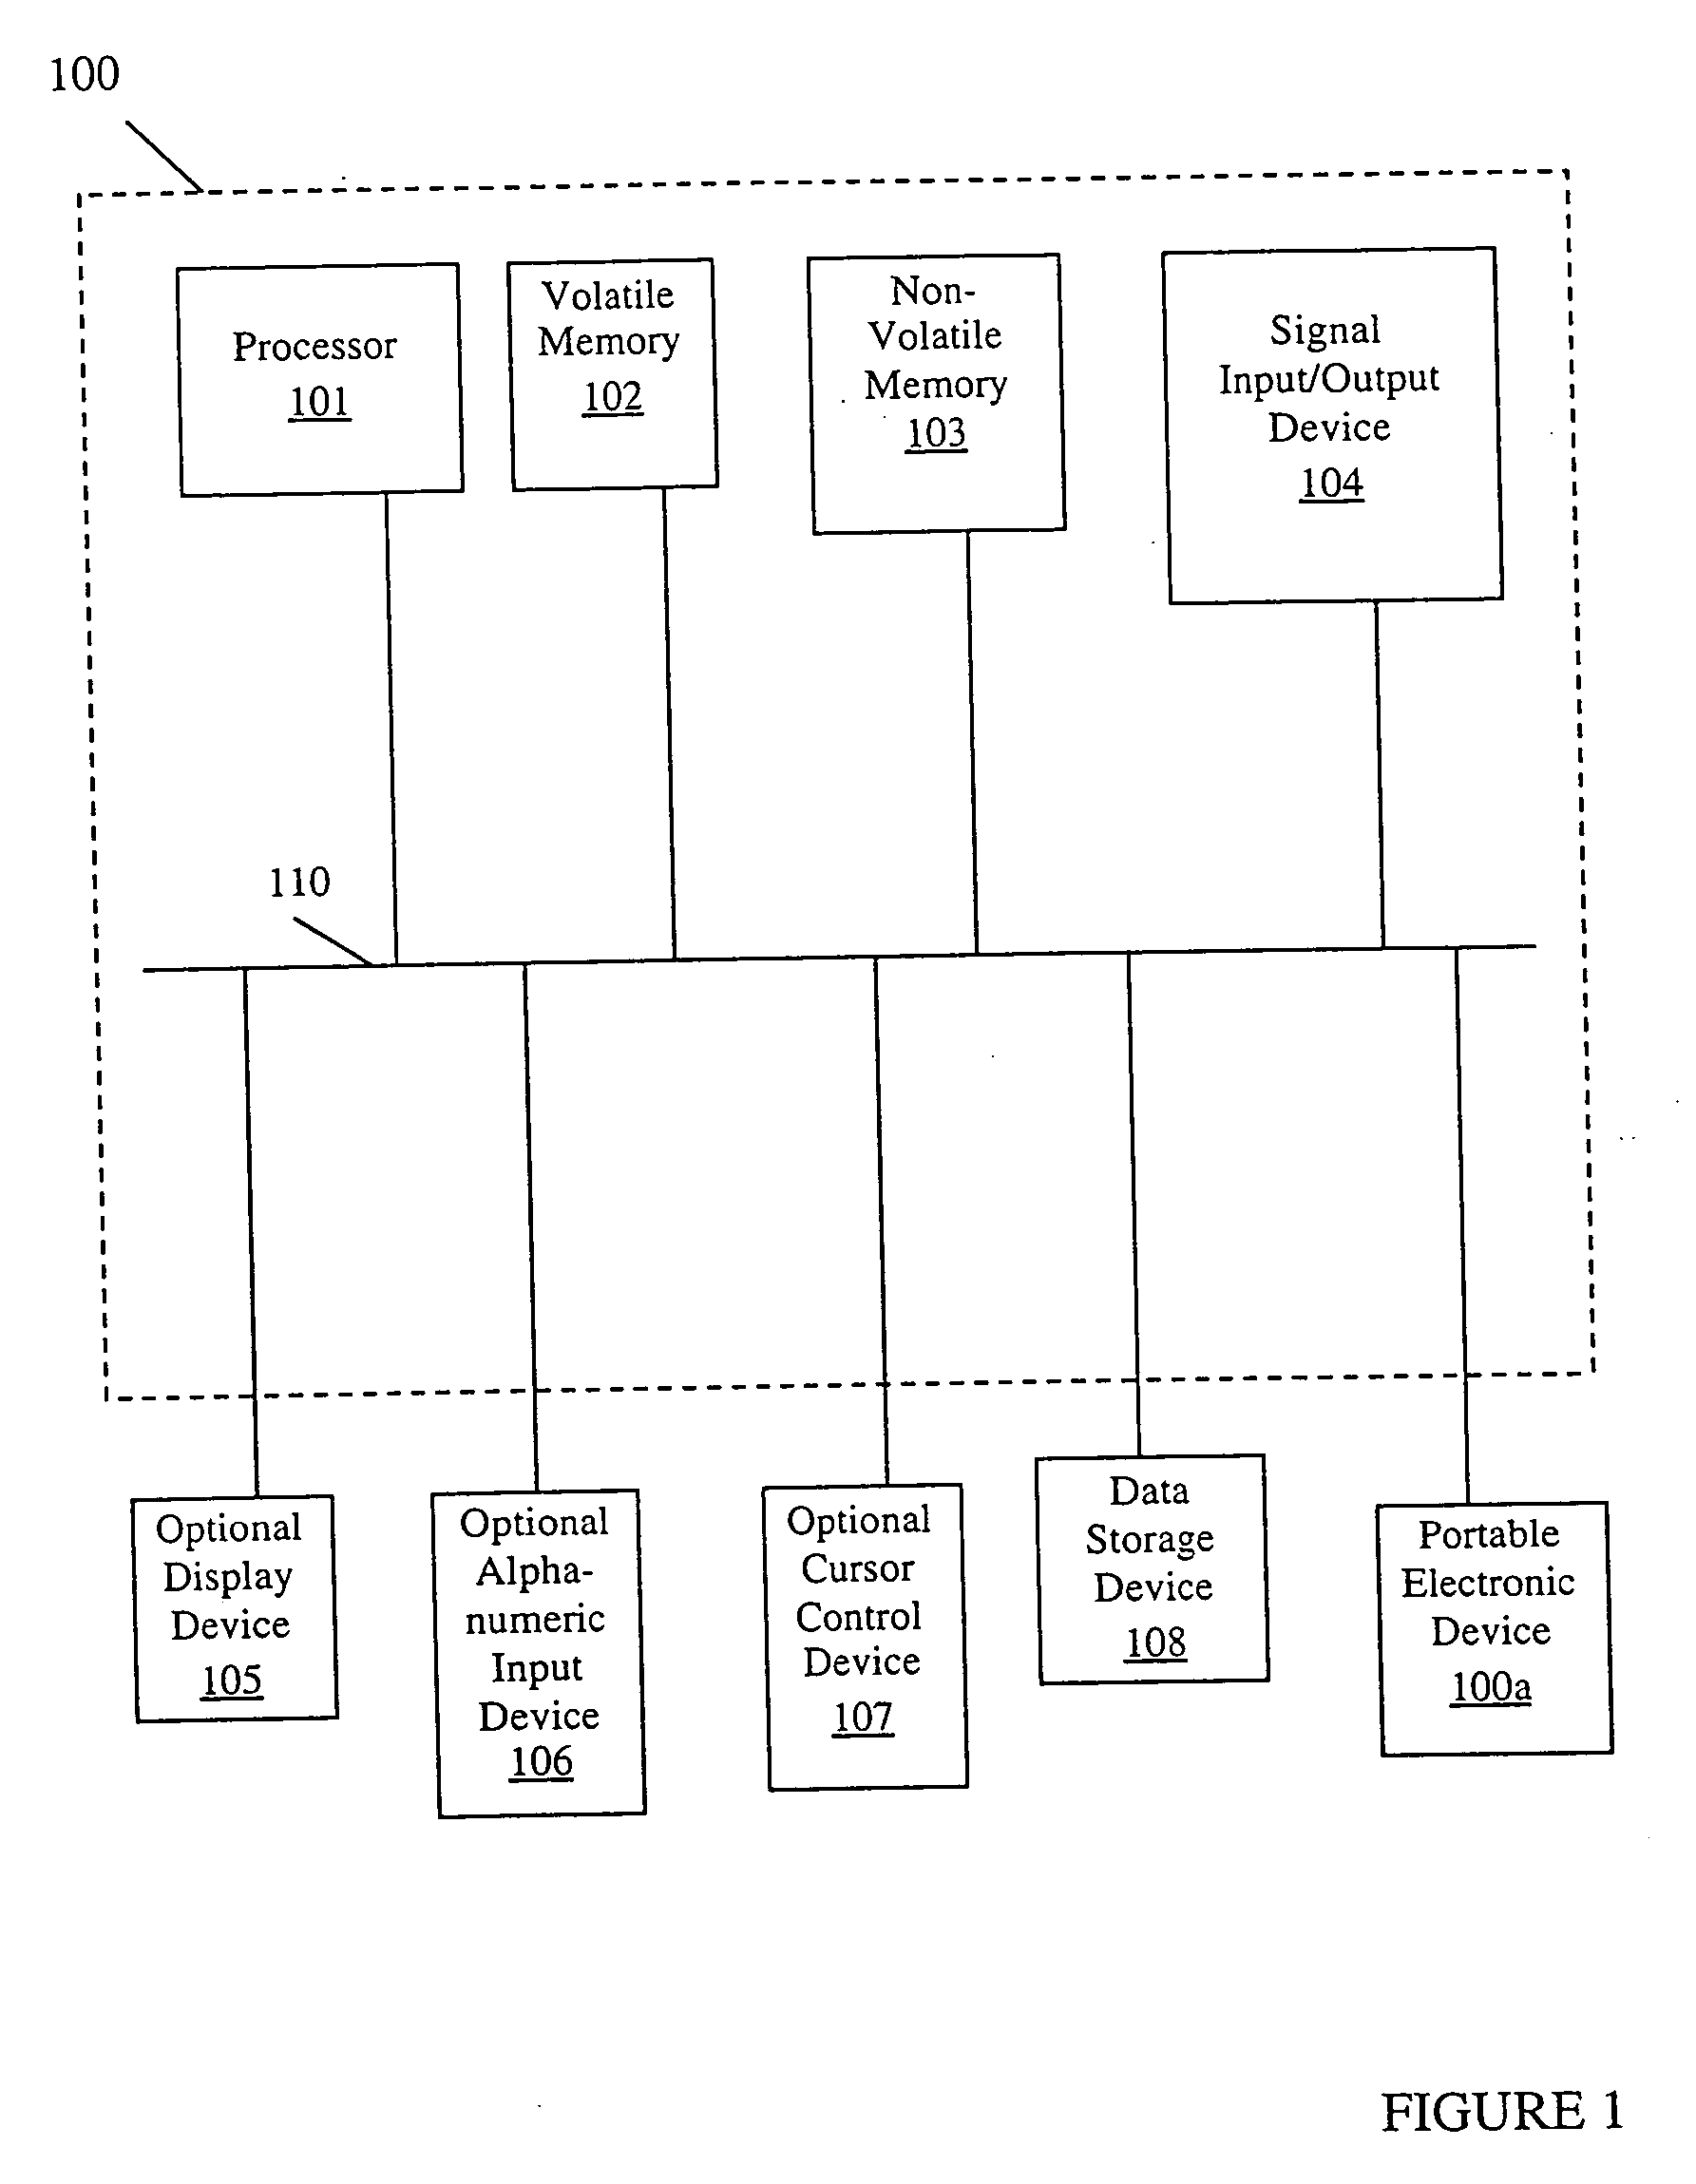 Method and system for controlling presentation of computer readable media on a media storage device